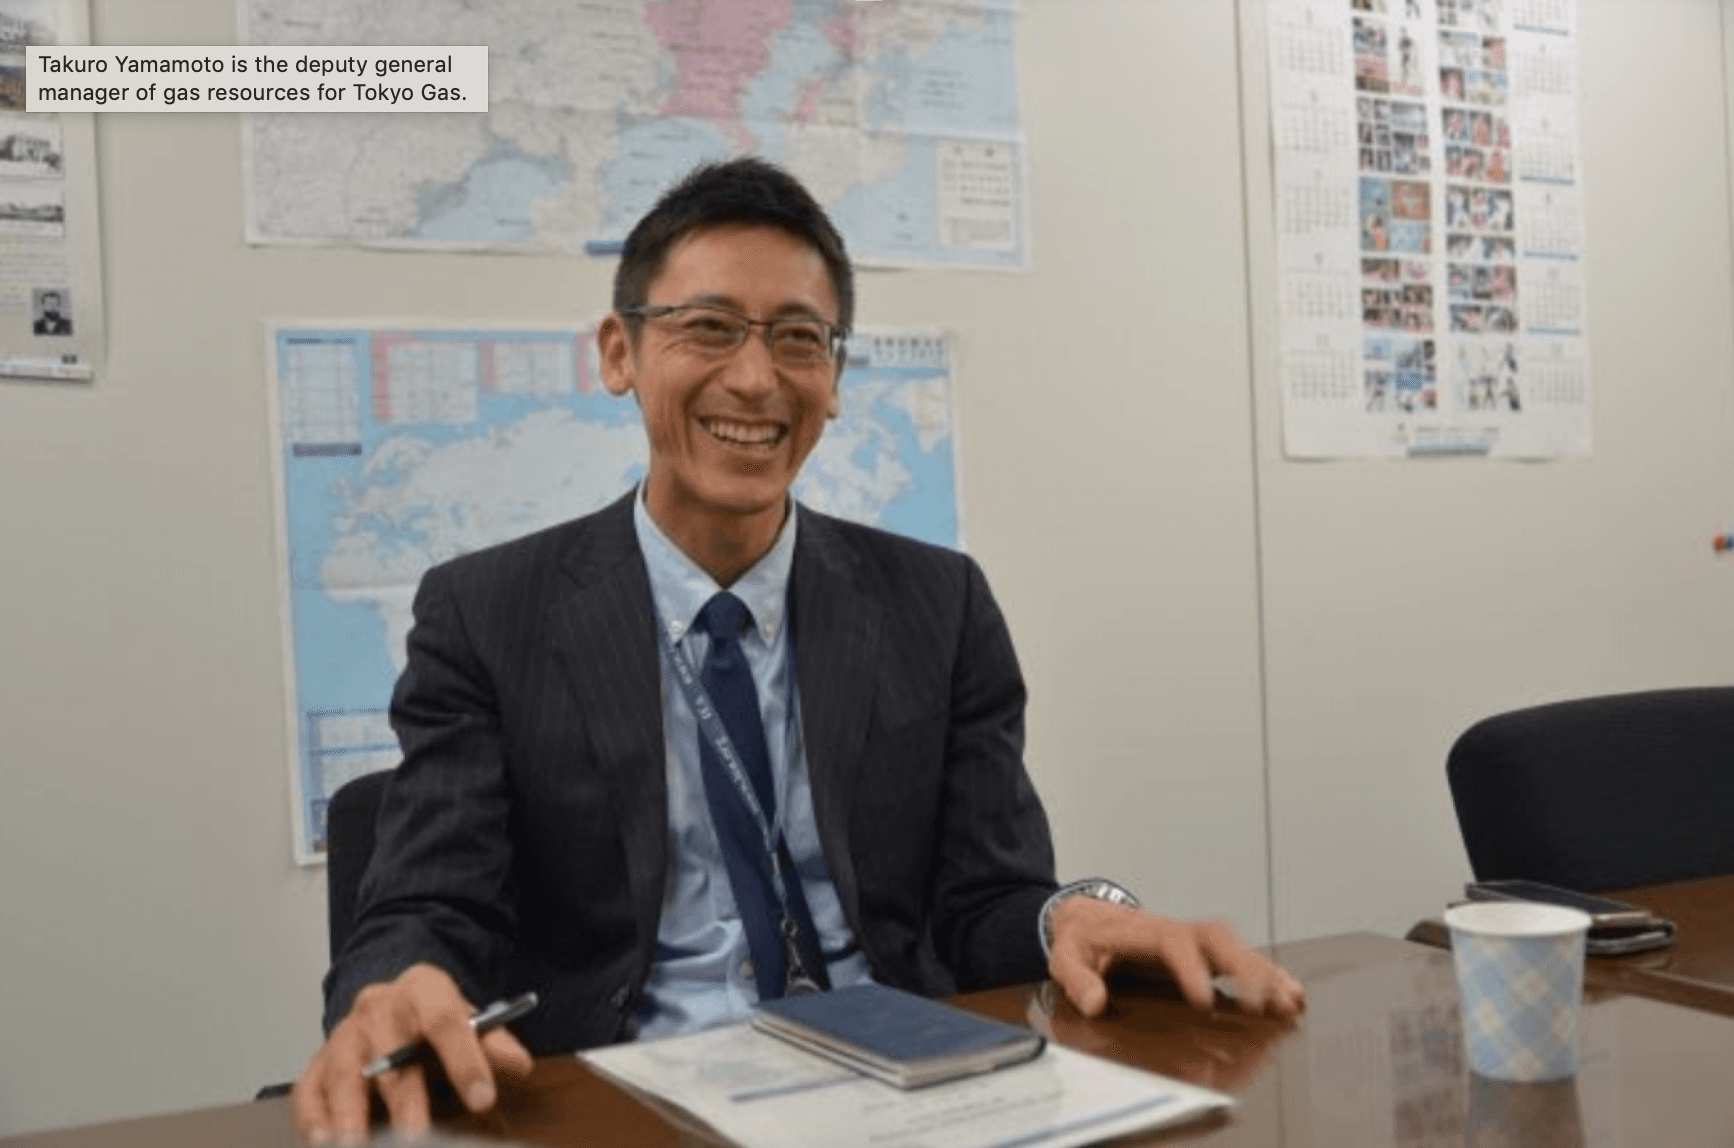 Takuro Yamamoto is the deputy general manager of gas resources for Tokyo Gas.